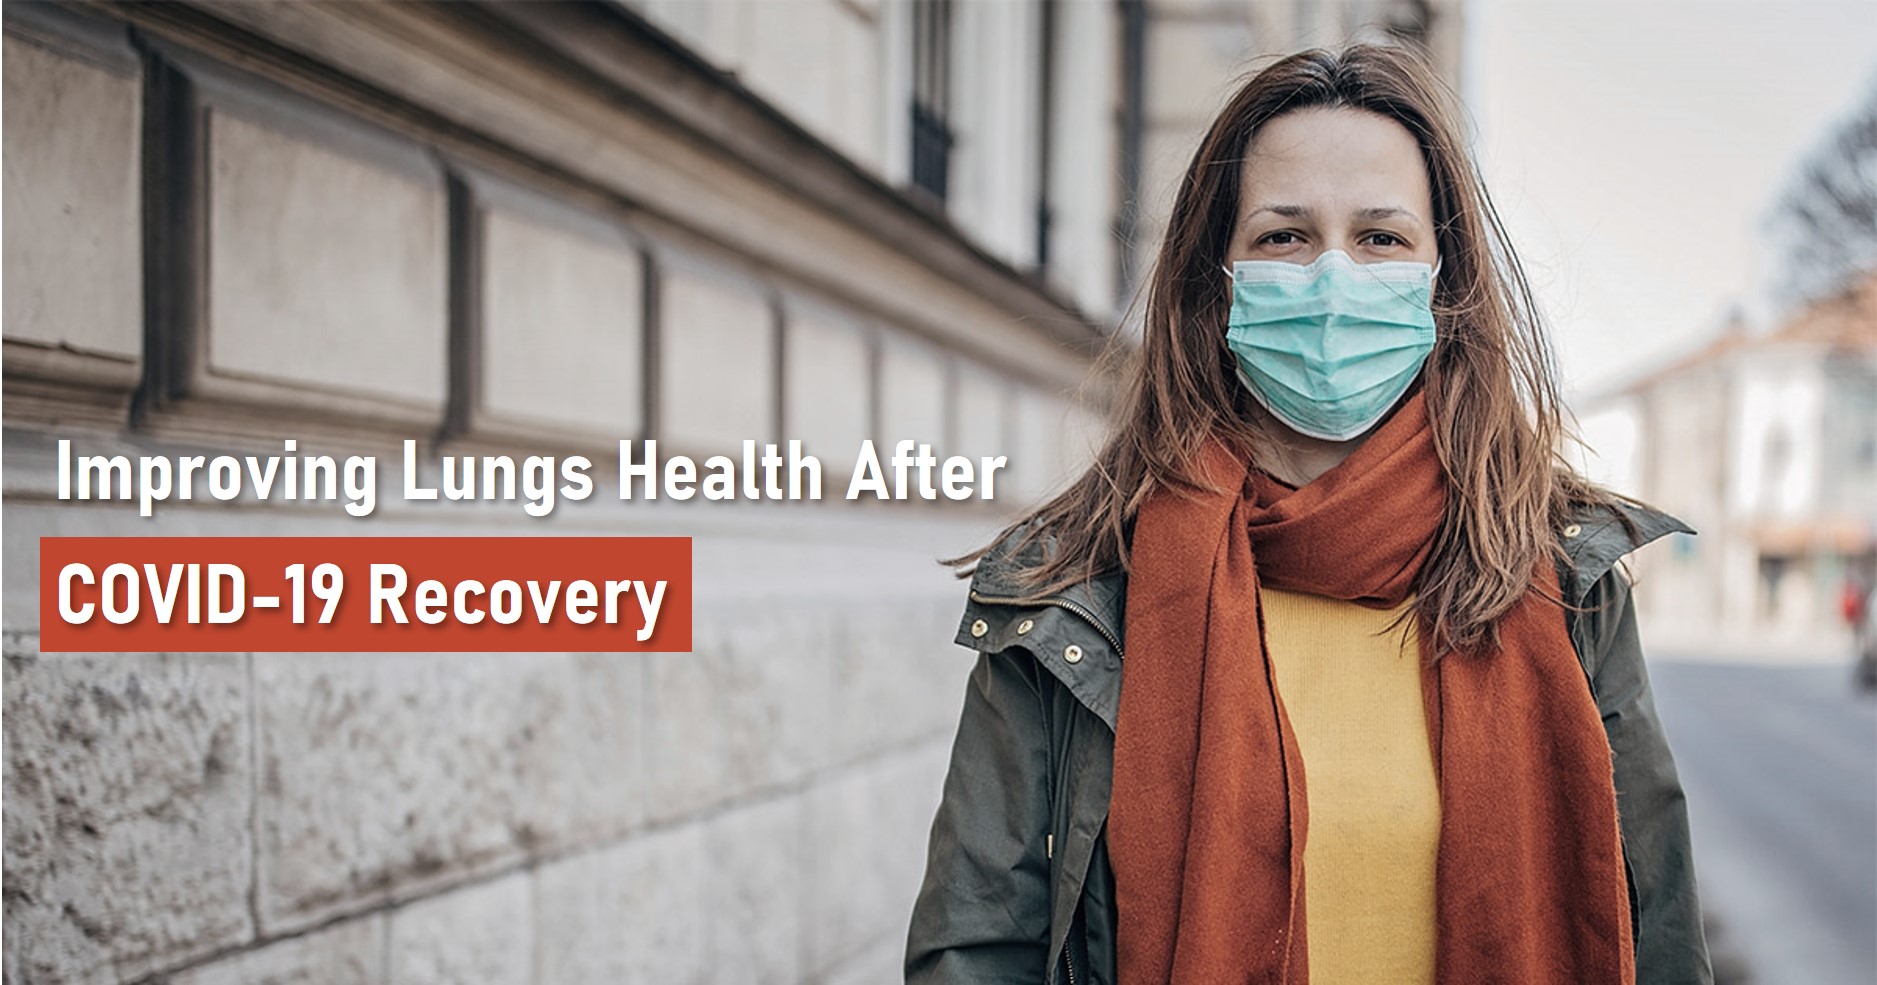 Improving Lungs Health After COVID-19 Recovery